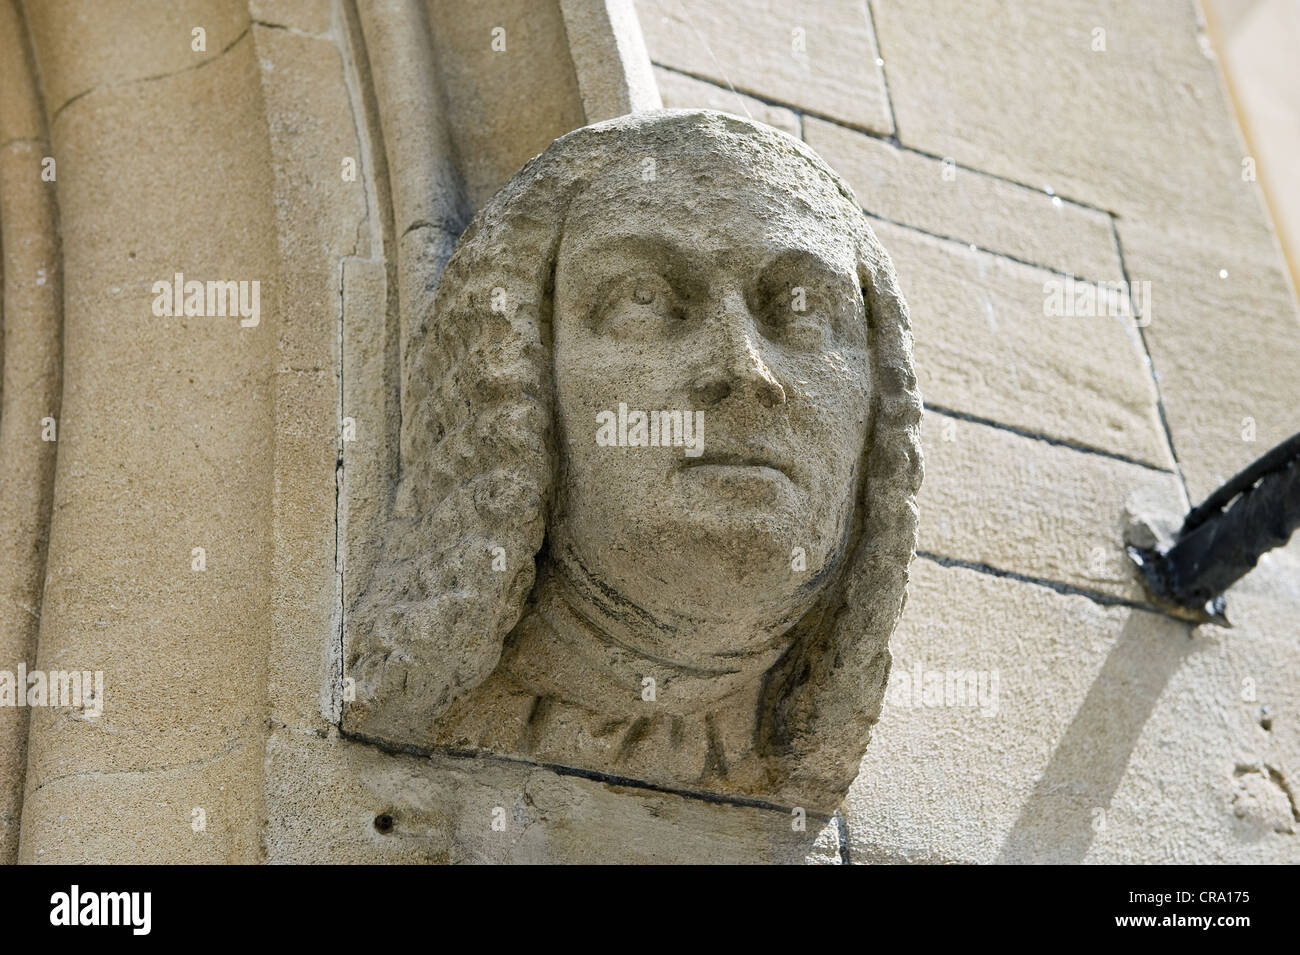 A stone carving of a barrister/judge Stock Photo